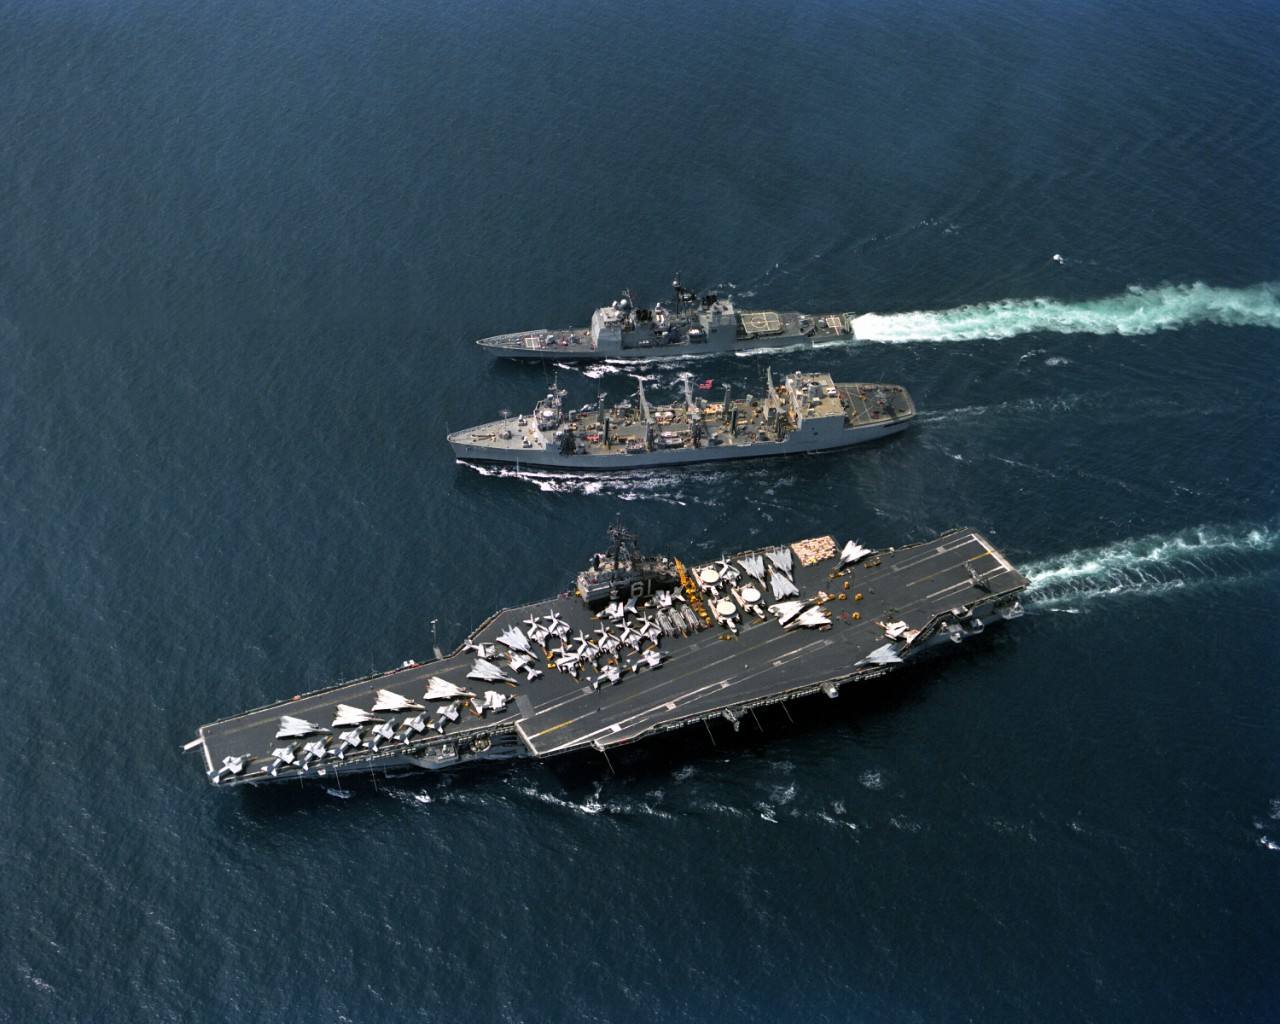 The aircraft carrier Ranger (CV-61) turns to port after completing an underway replenishment with Kansas City as the guided missile cruiser Valley Forge (CG-50) takes on fuel from the replenishment oiler, 28 March 1991. (U.S. Navy Photograph DN-SC-93-05050, PH3 Bos, National Archives and Records Administration, Still Pictures Division, College Park, Md.)